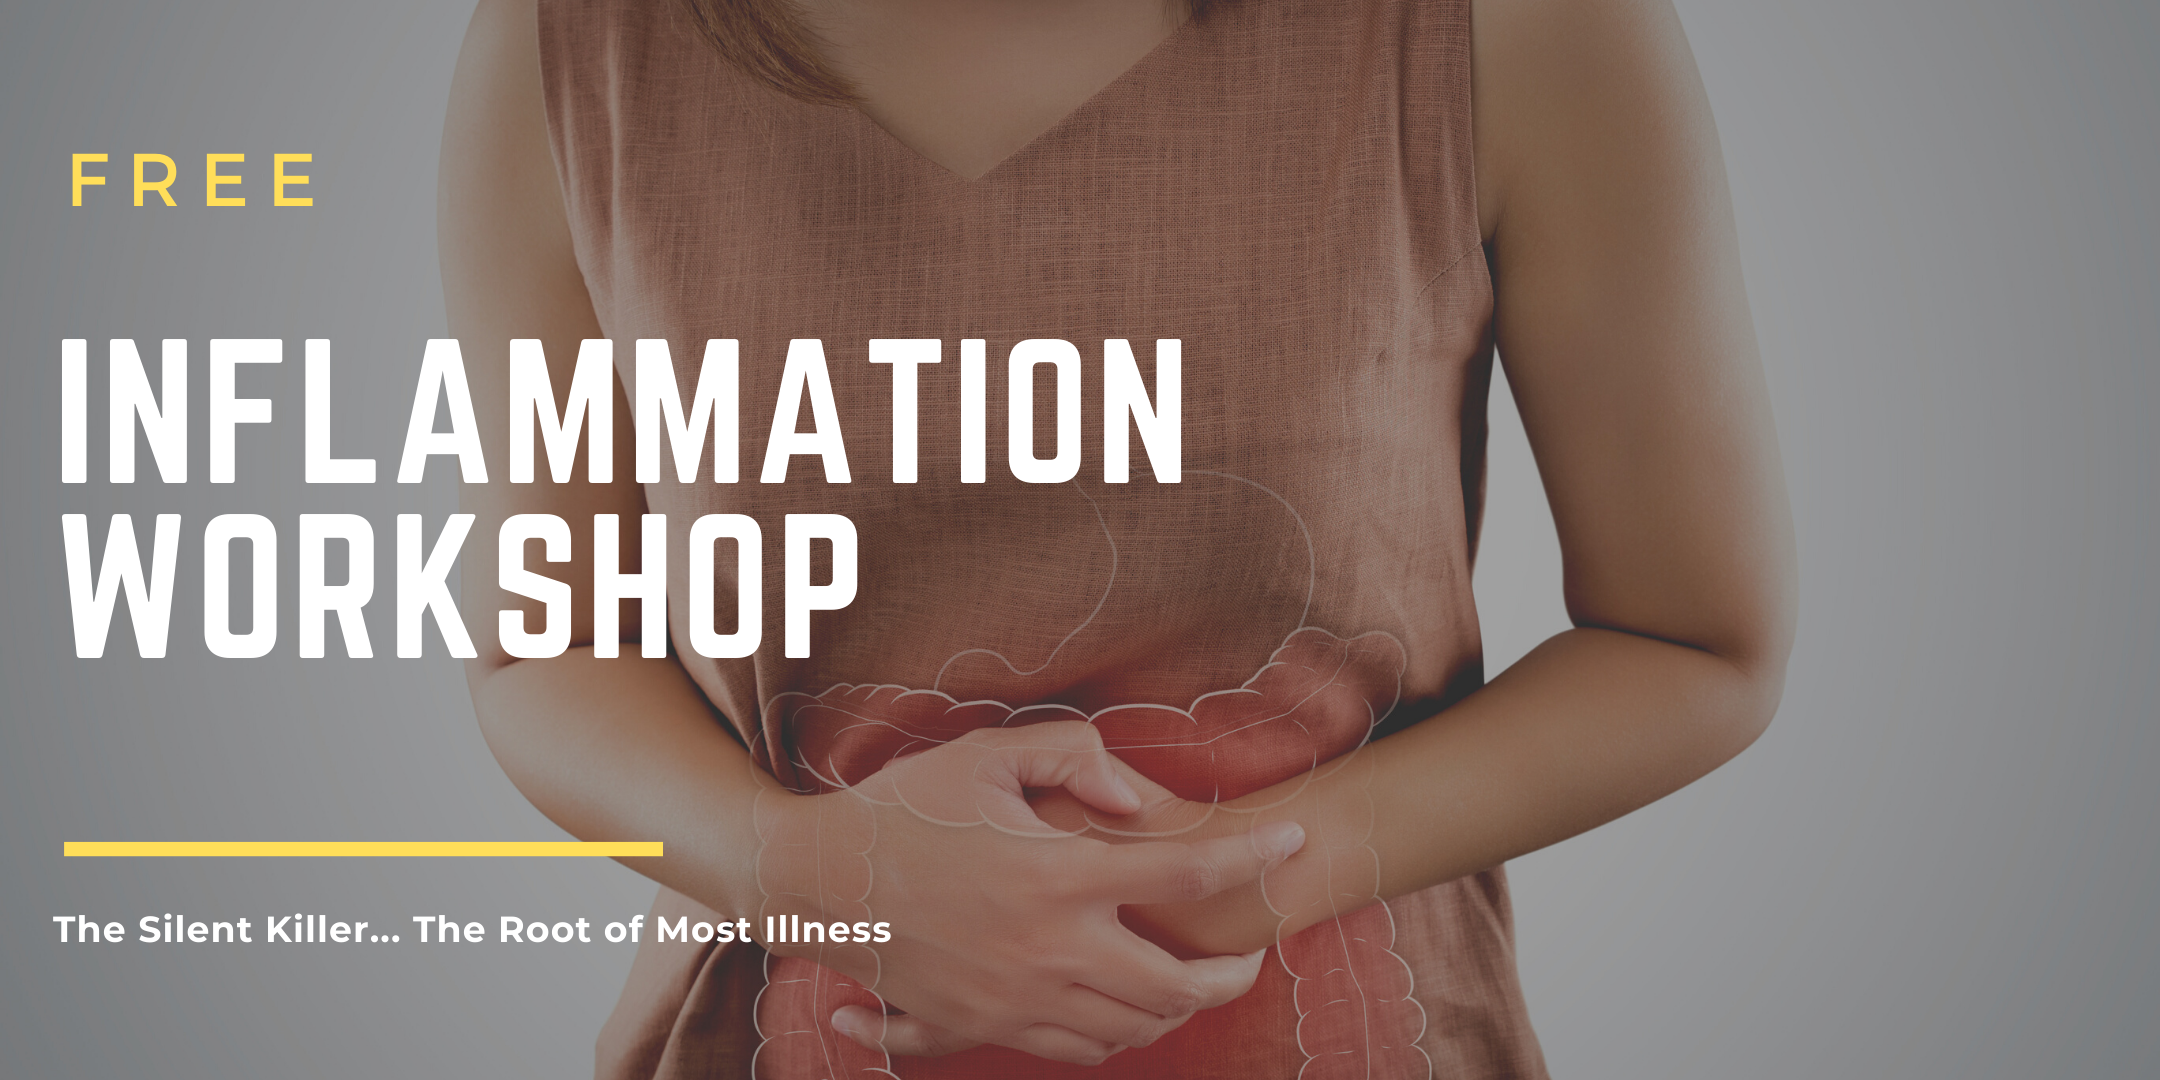 FREE Inflammation Workshop - The Body's Alert Sign!